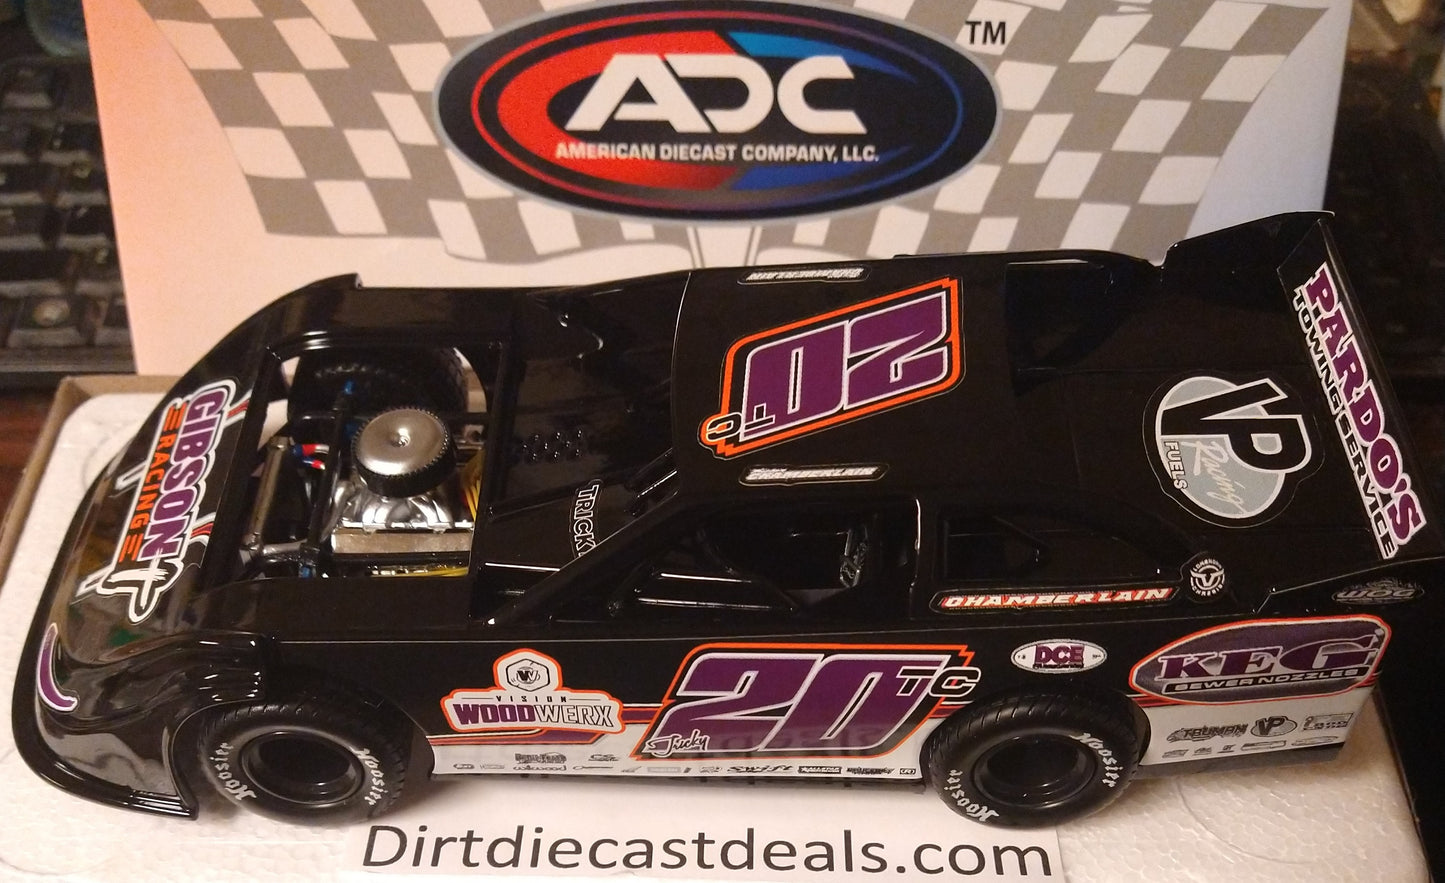 Tristan Chamberlain ADC Red Series 1/24 Late Model Dirt Car Diecast